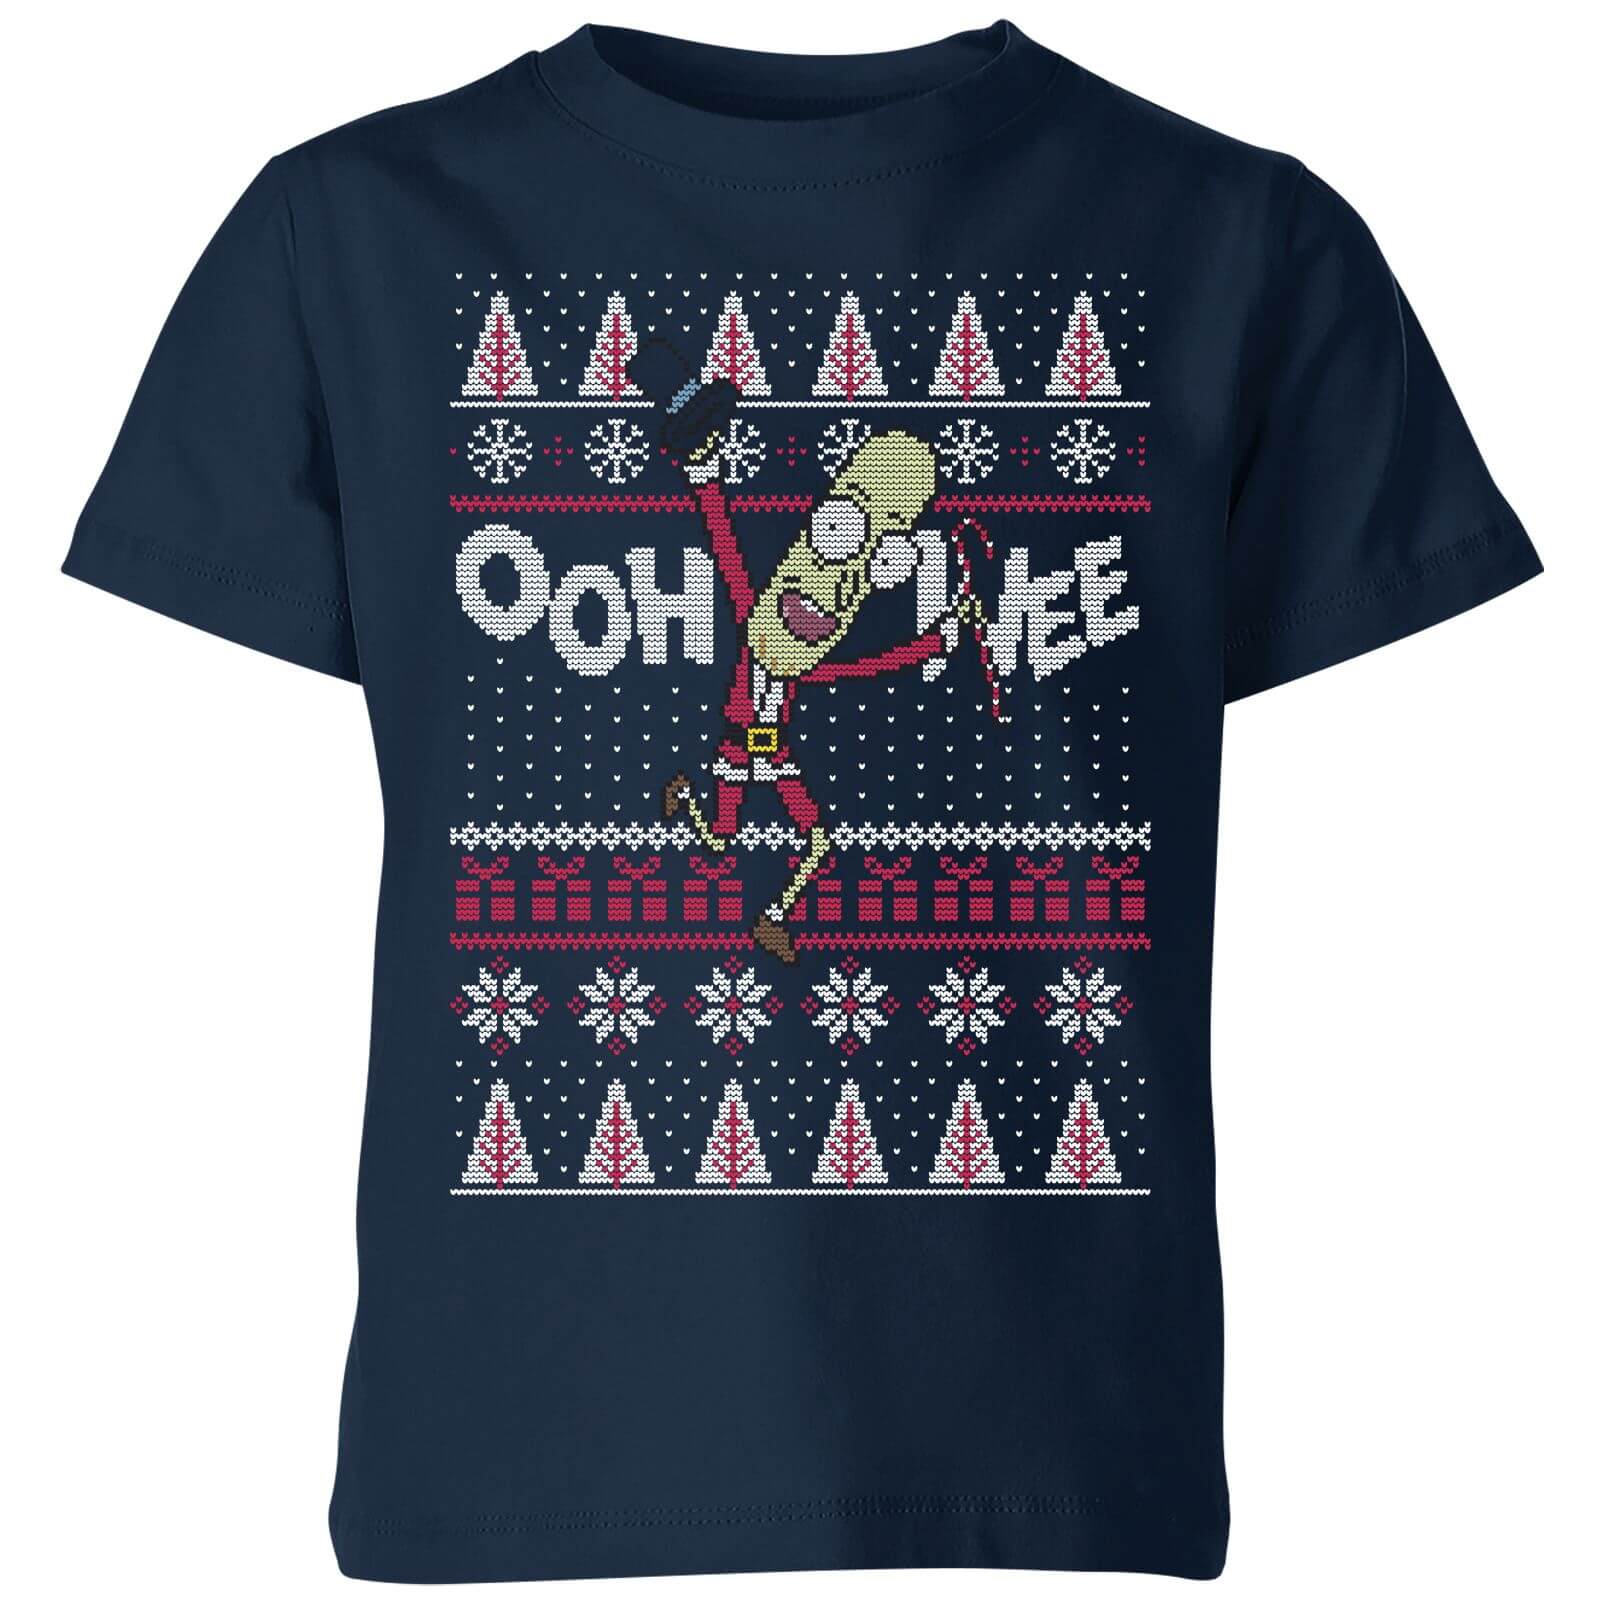 Image of Rick and Morty Ooh Wee Kids' Christmas T-Shirt - Navy - 11-12 Jahre